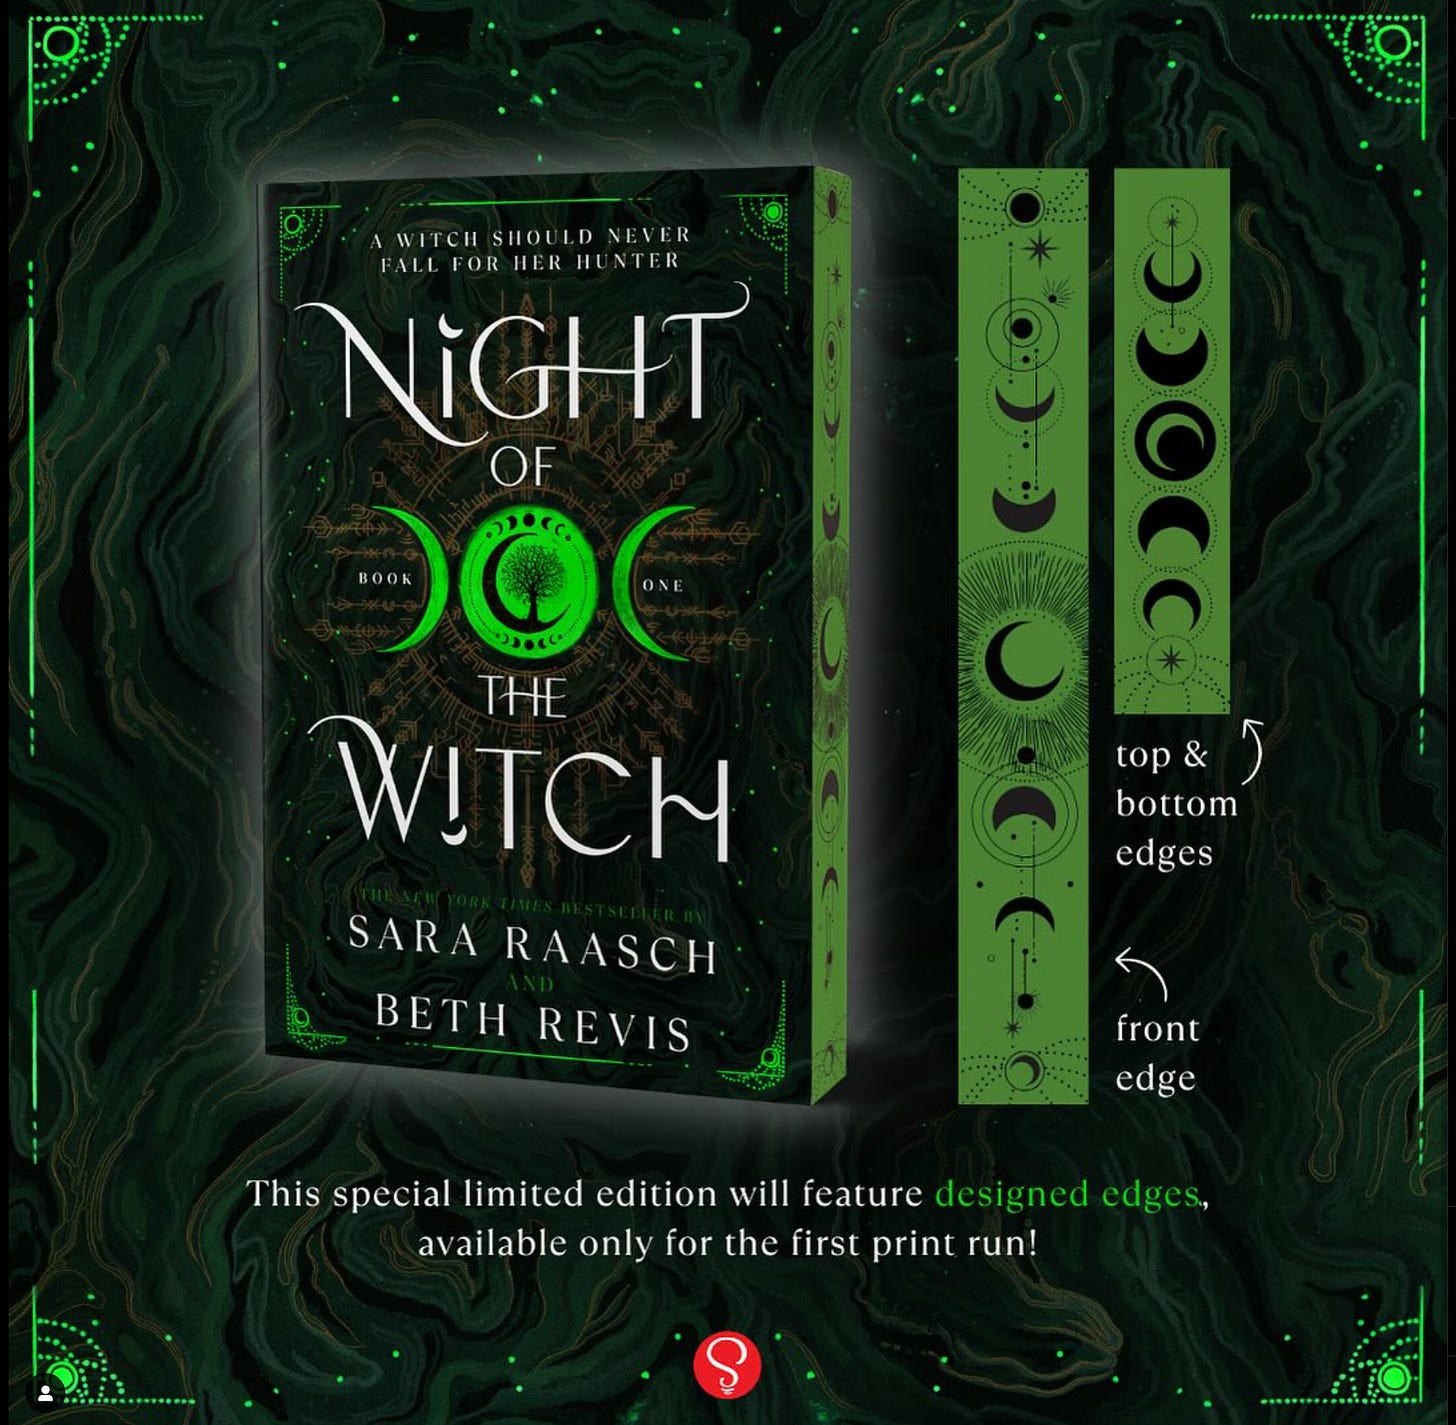 Graphic showing the sprayed edge design for Night of the Witch--green borders with black moons